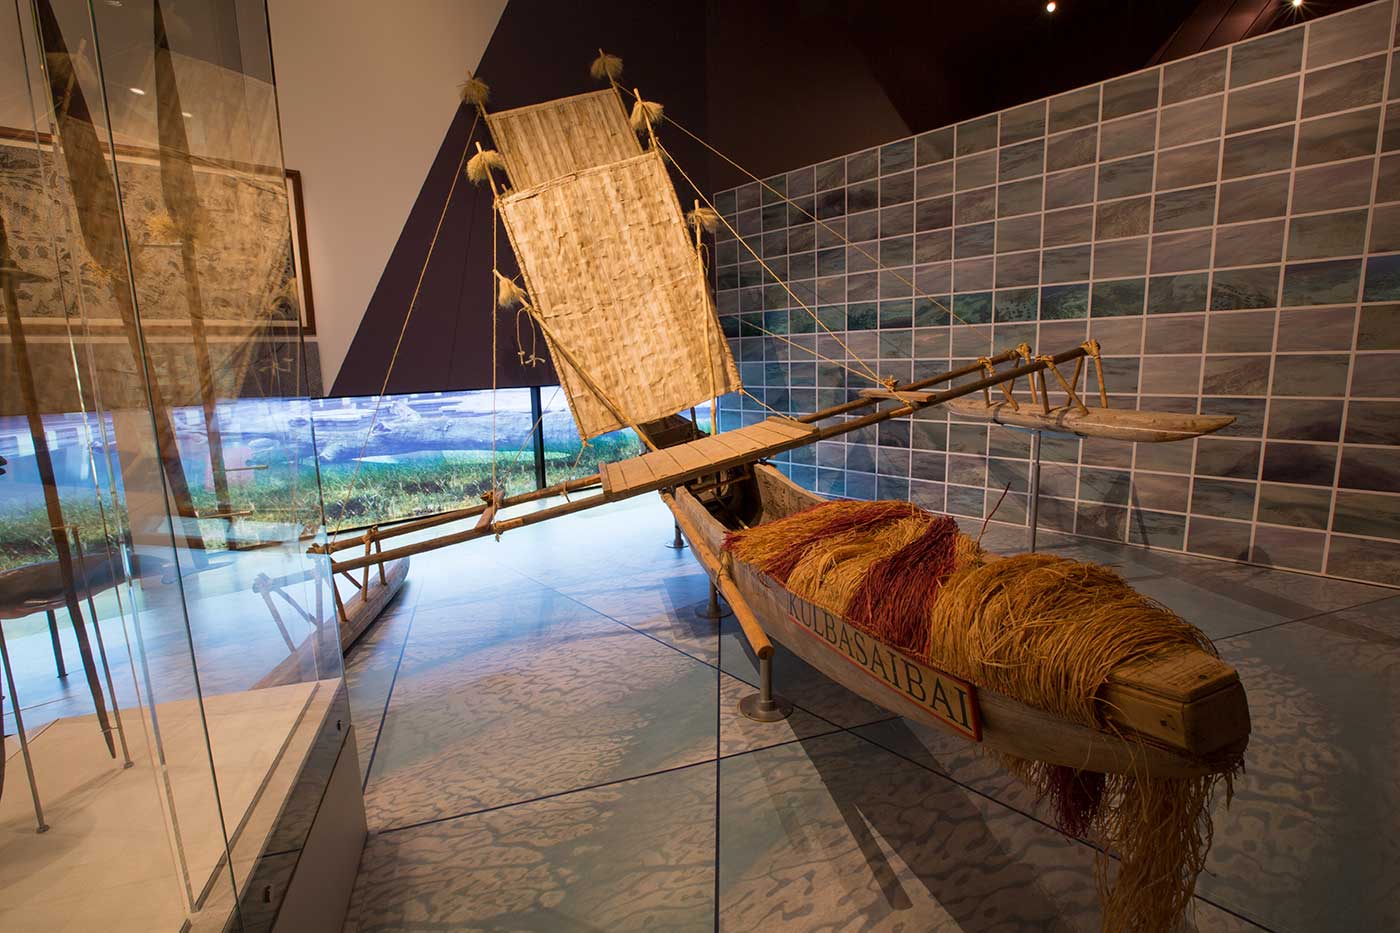 Outrigger canoe shown in gallery space - click to view larger image